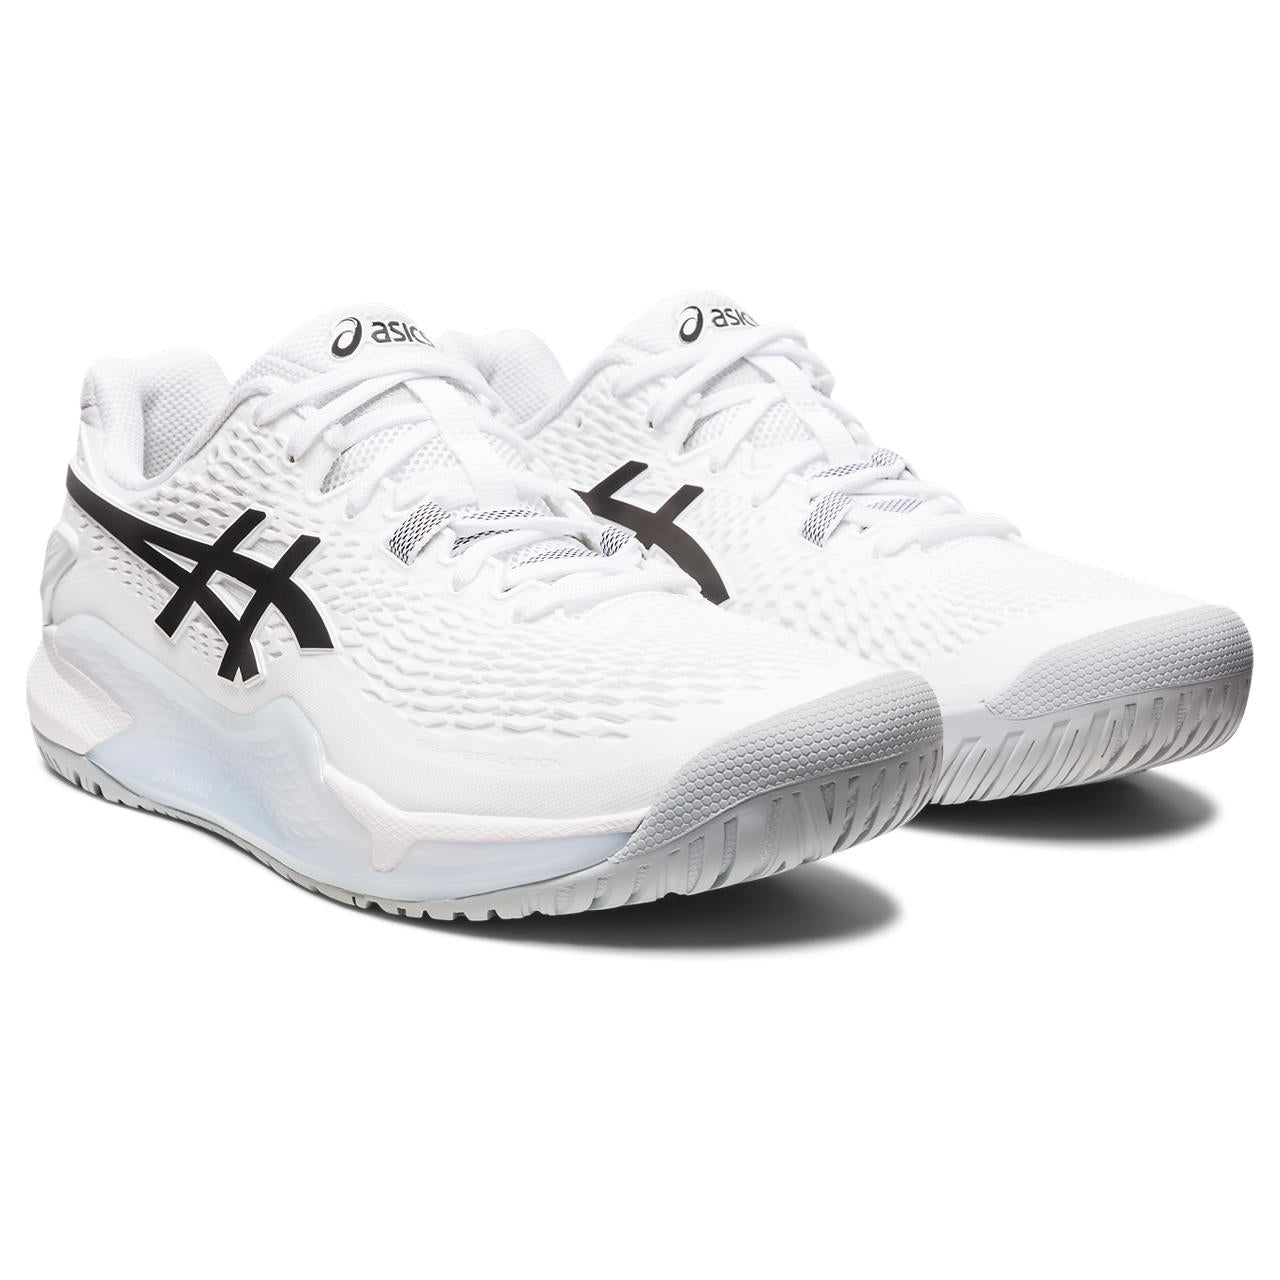 Front angle view of the ASIC Men's Resolution 9 tennis shoe in the color White/Black